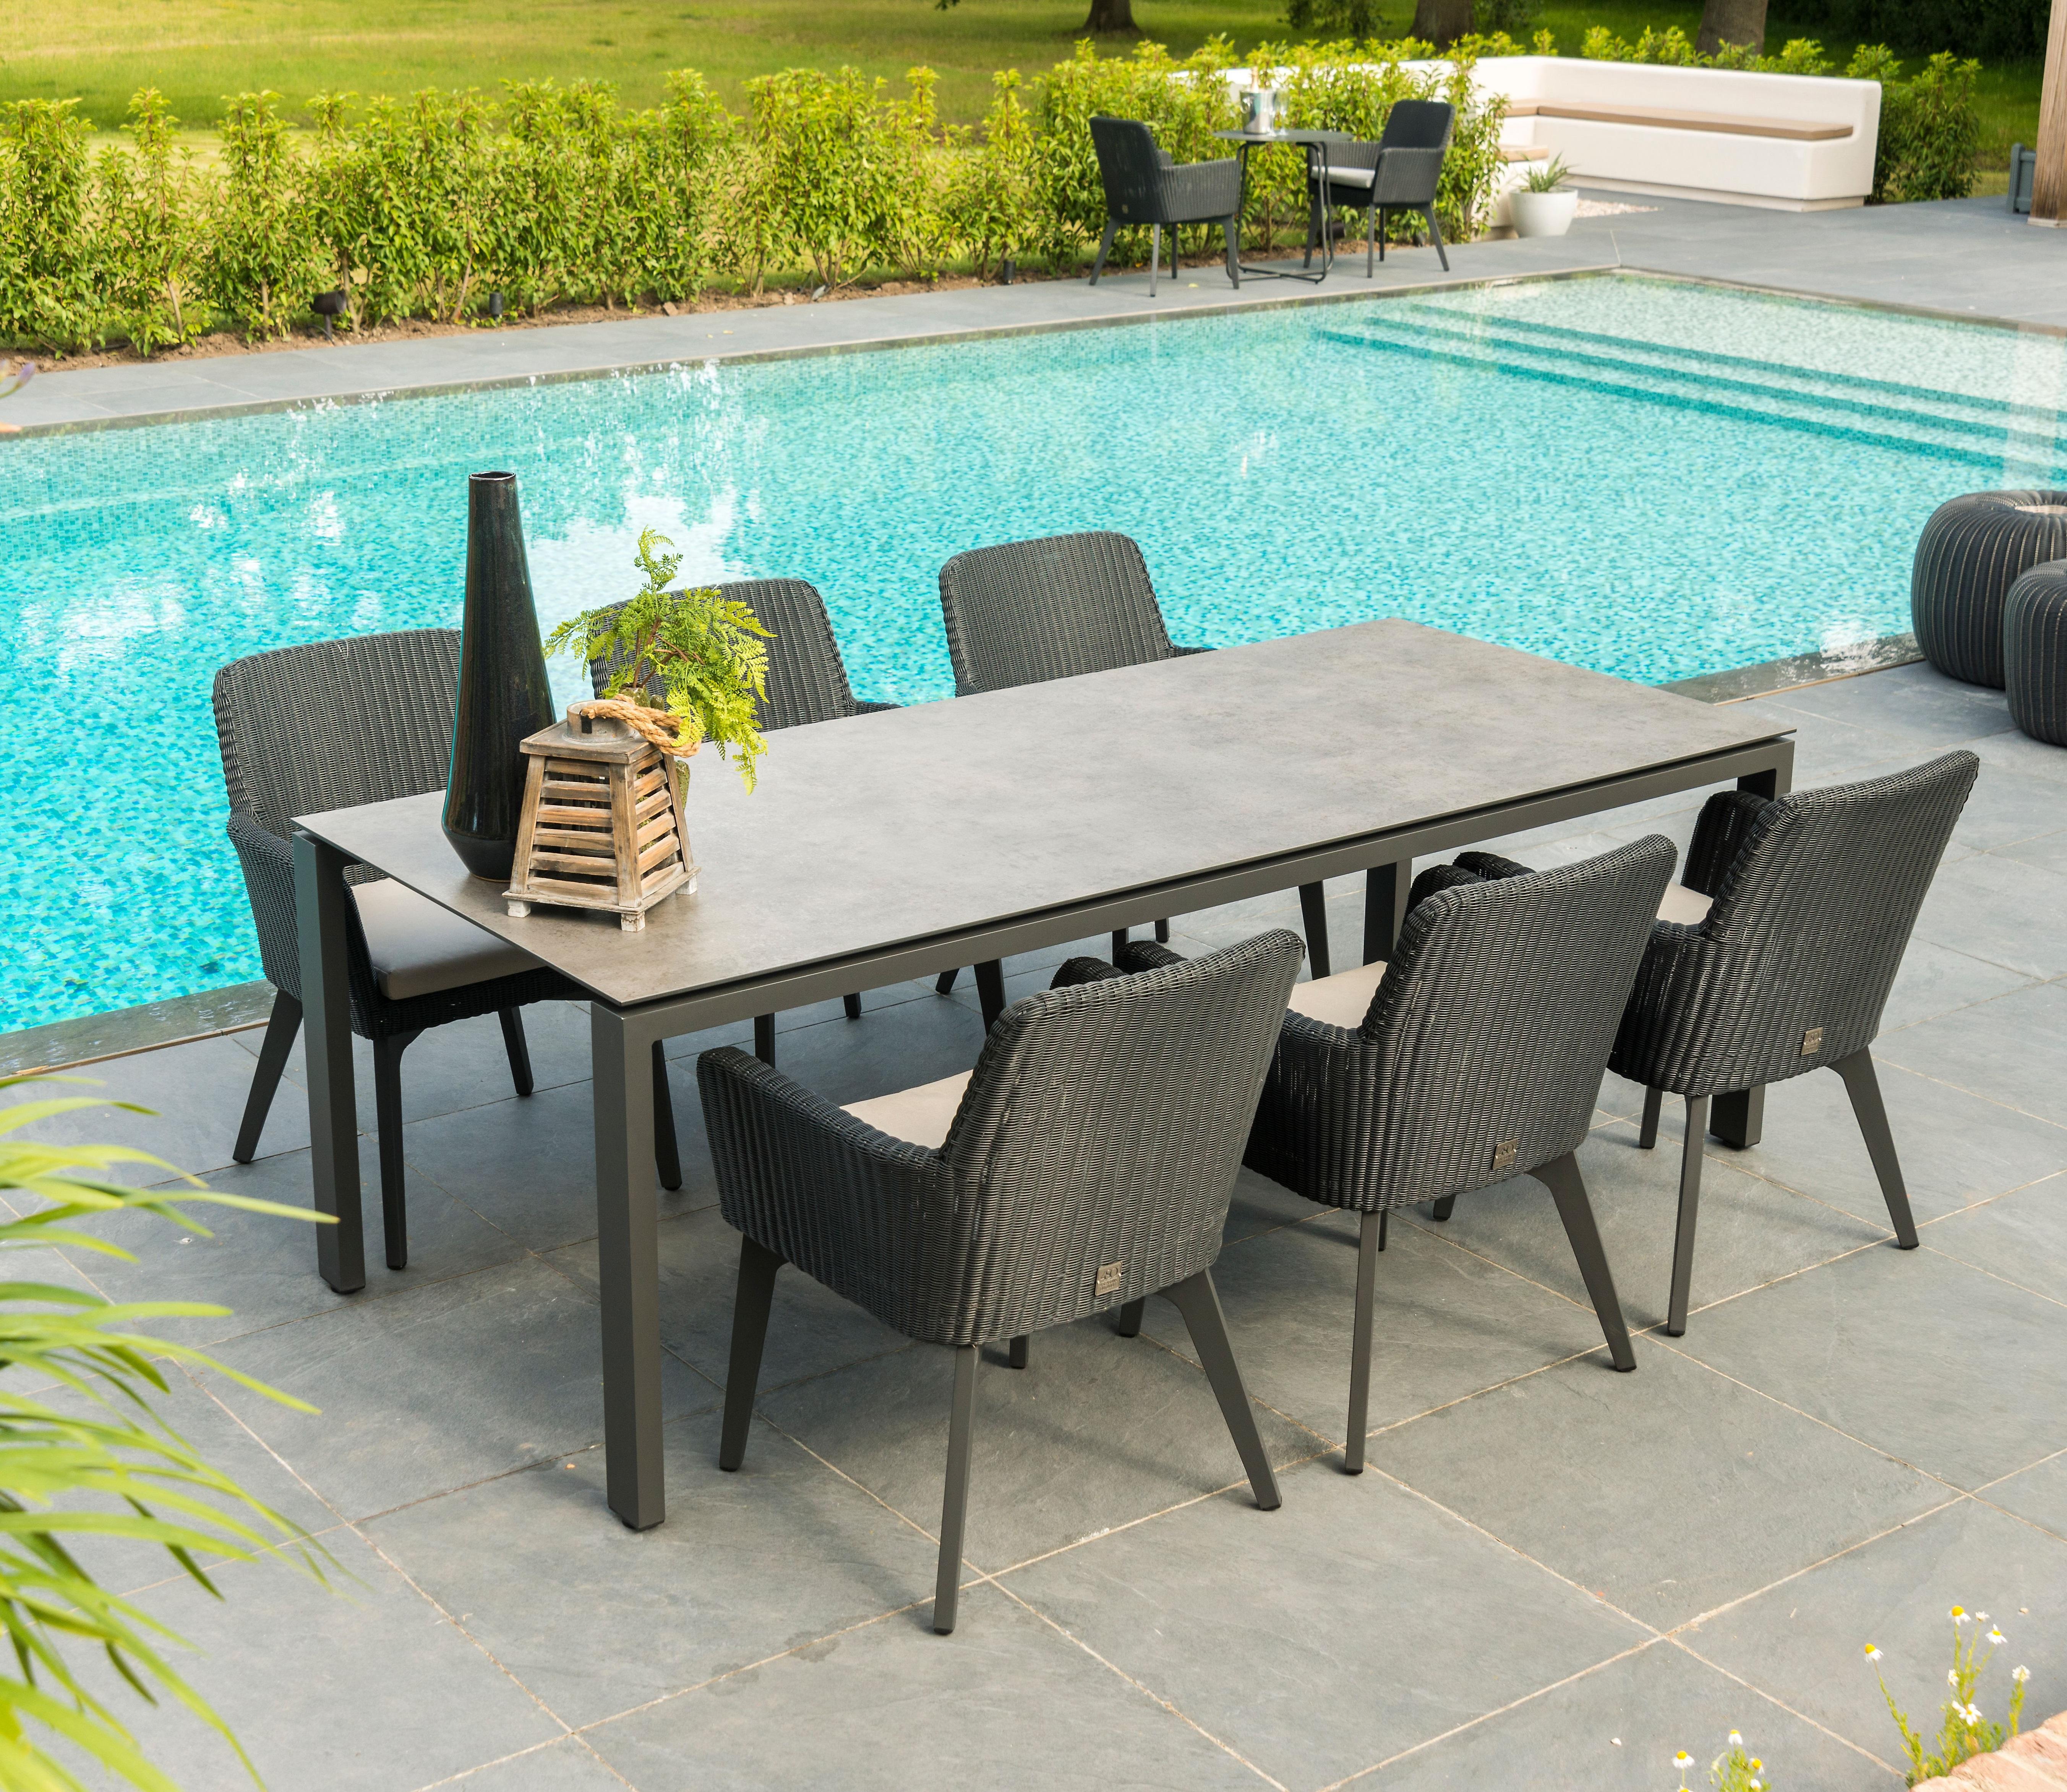 220 cm HPL and aluminium garden modern dining table with rattan grey garden dining chairs